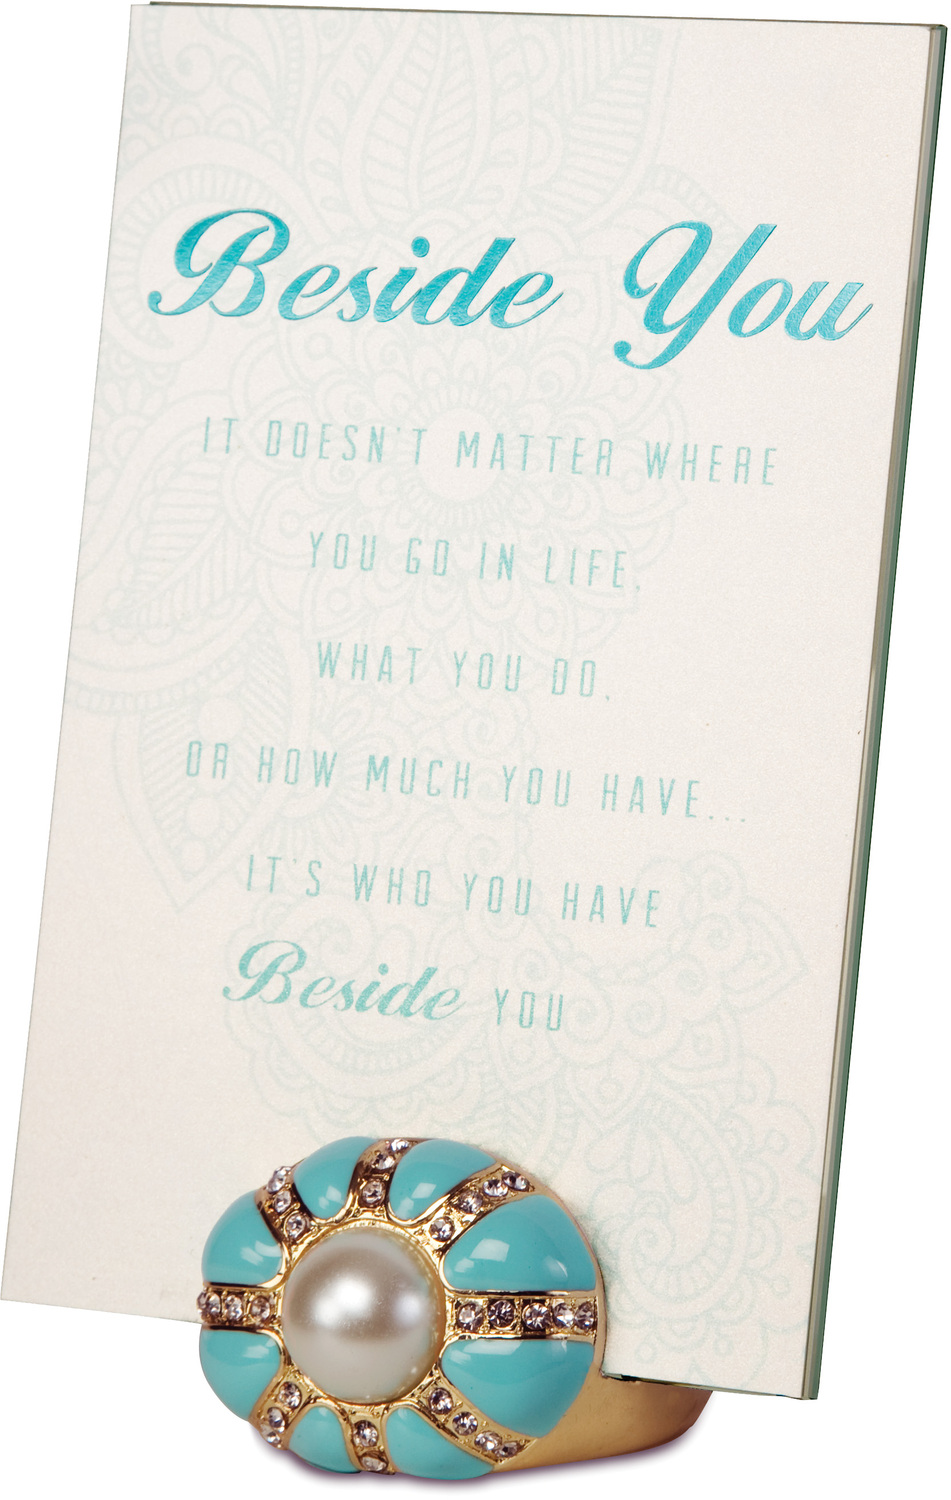 Beside You by Simply Shining - Beside You - 4" x 6" Jeweled Photo Frame